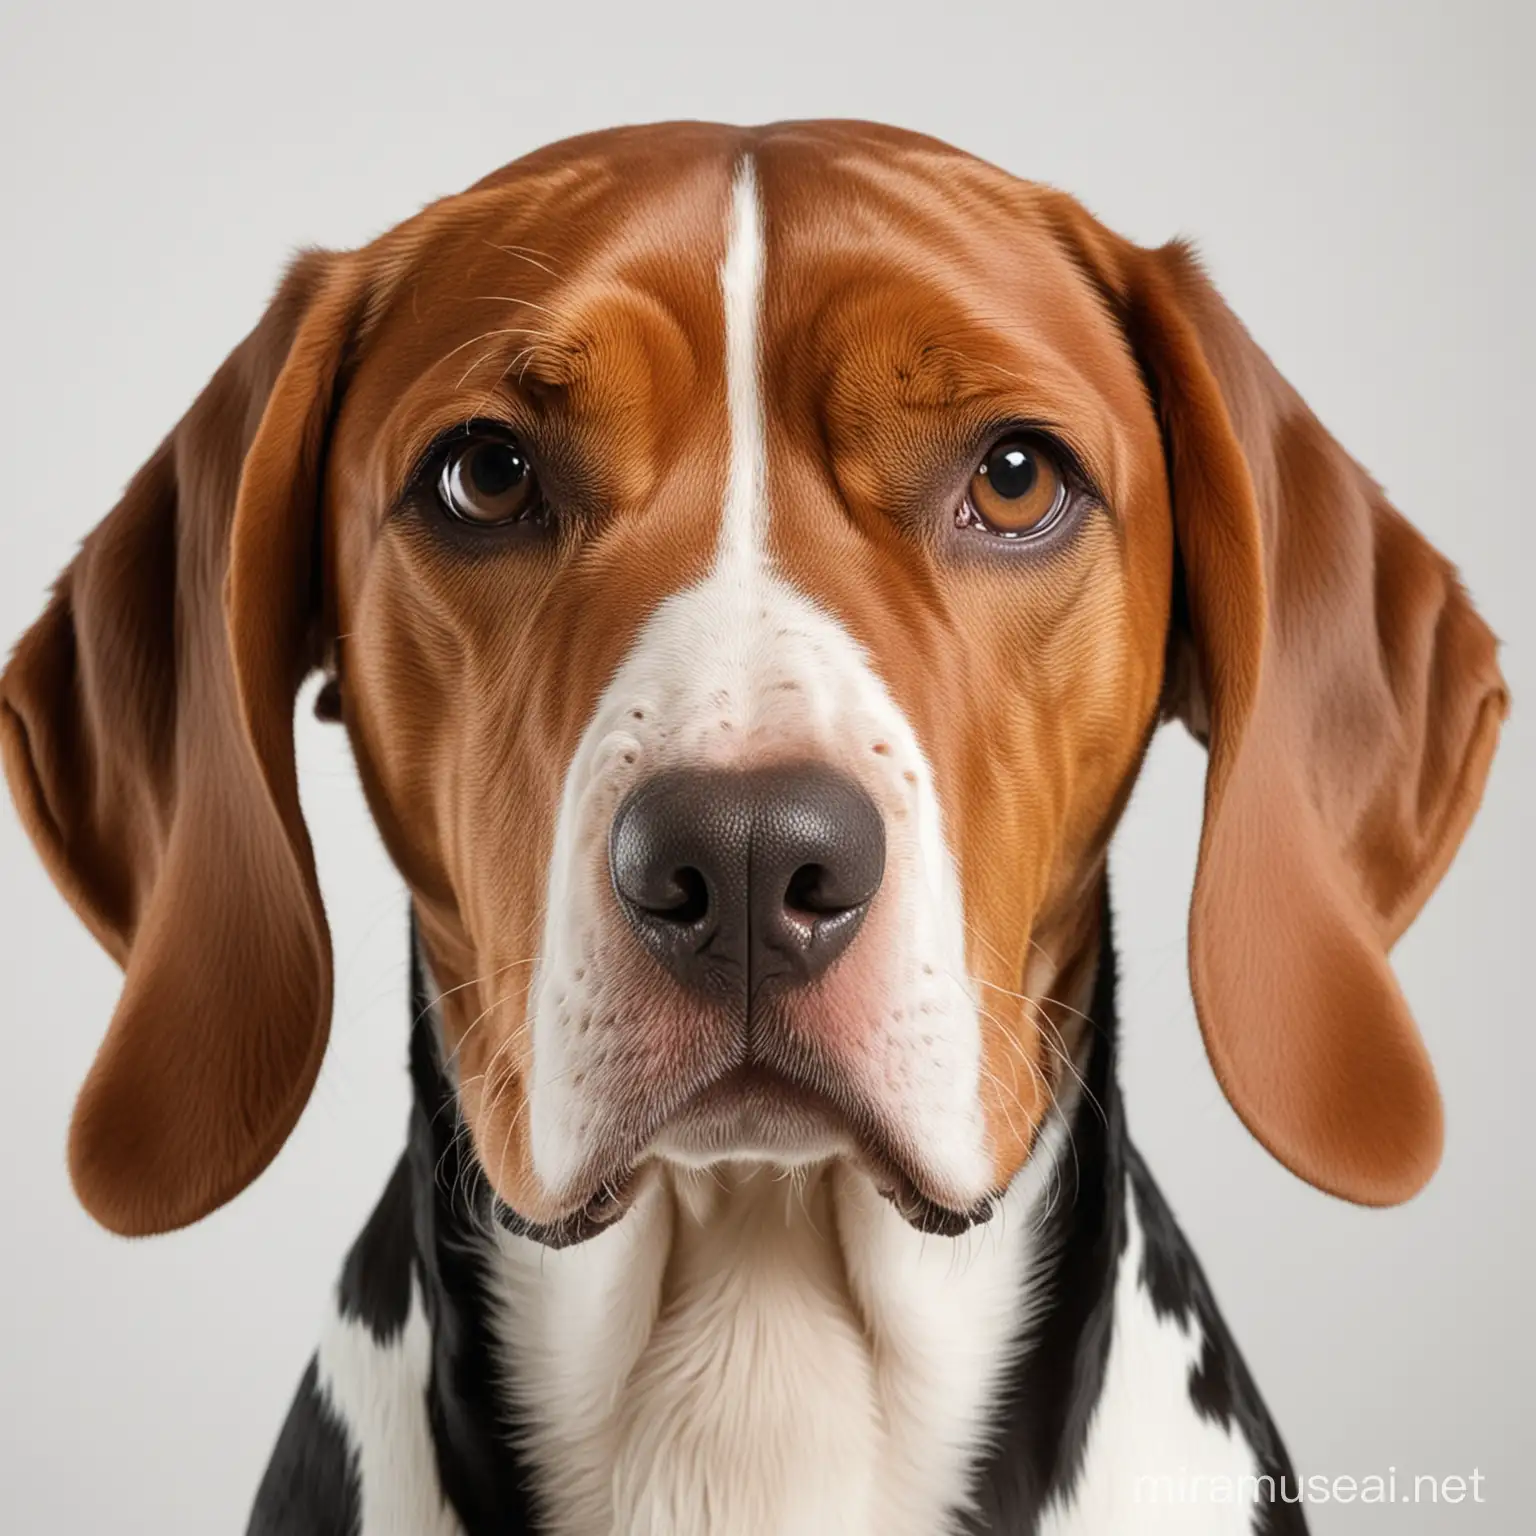 American English Coonhound Portrait on White Background